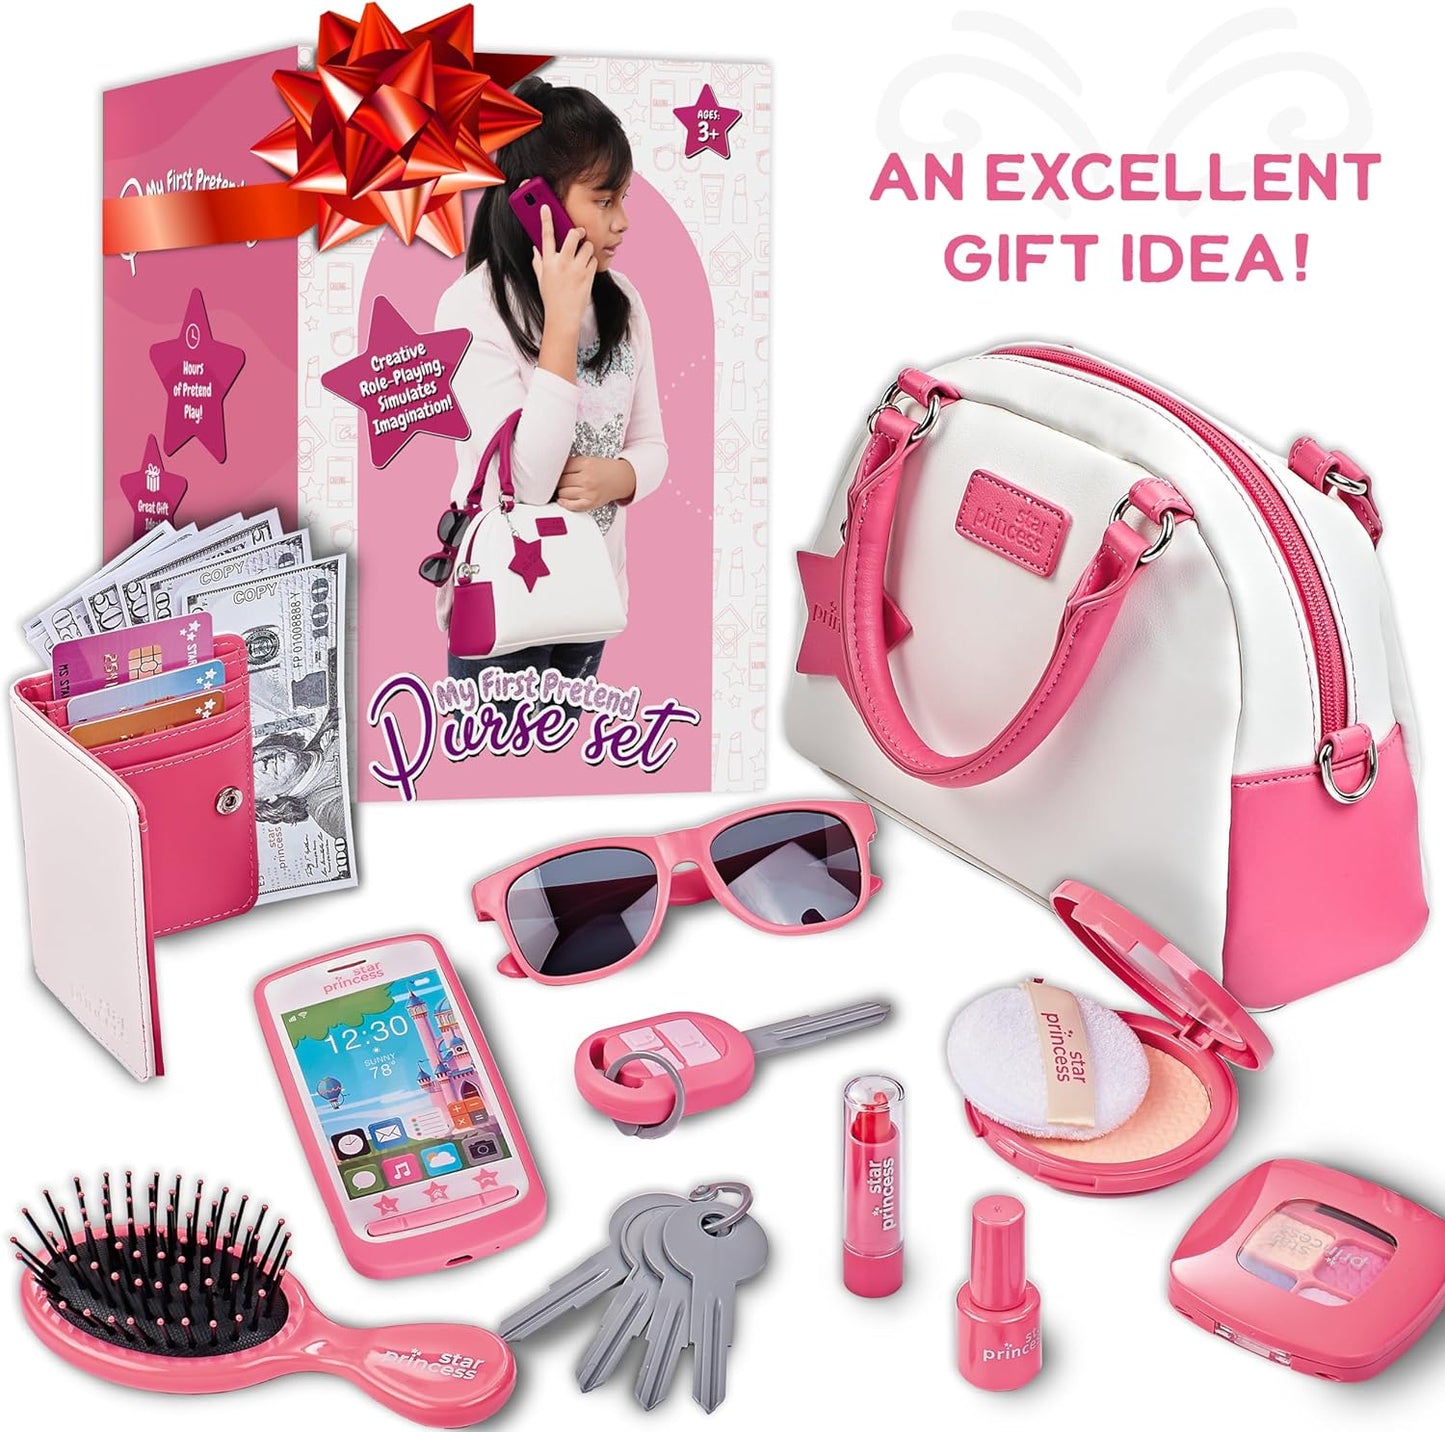 Deluxe Pretend Play Purse Set with Accessories - Pink Edition